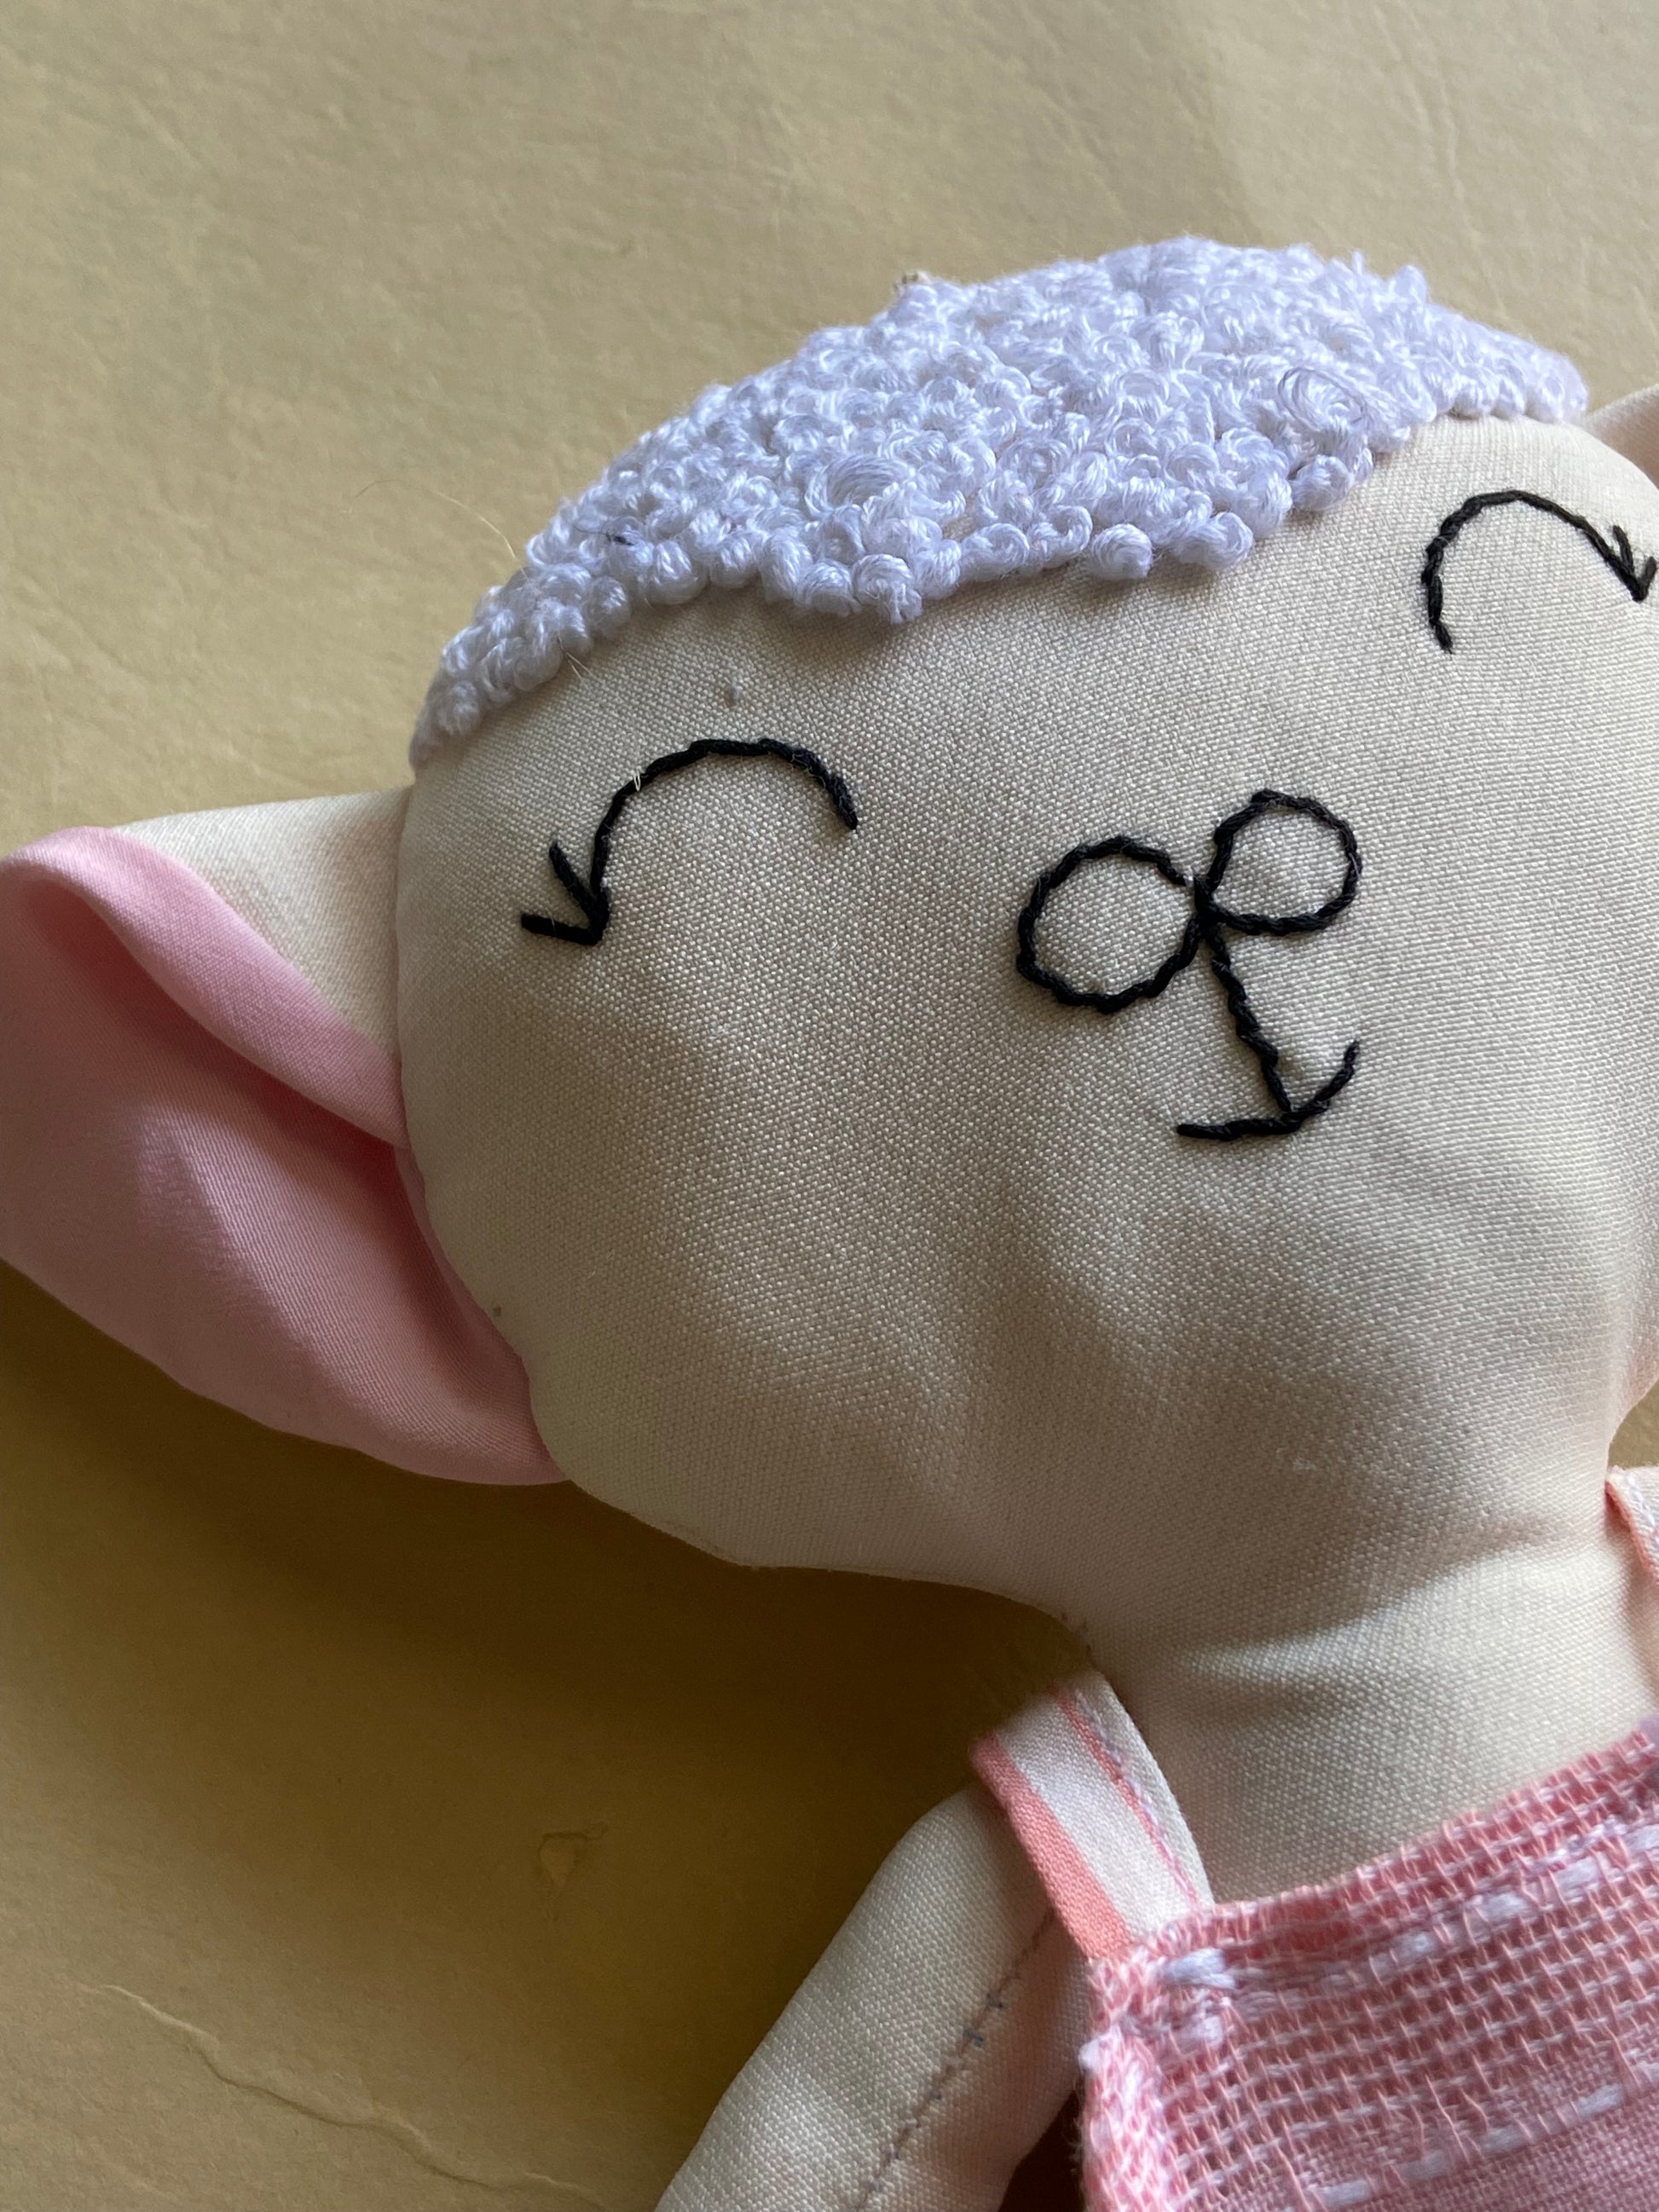 sheep-stuffed-toy-upcycled-and-handmade-pink-doll-face